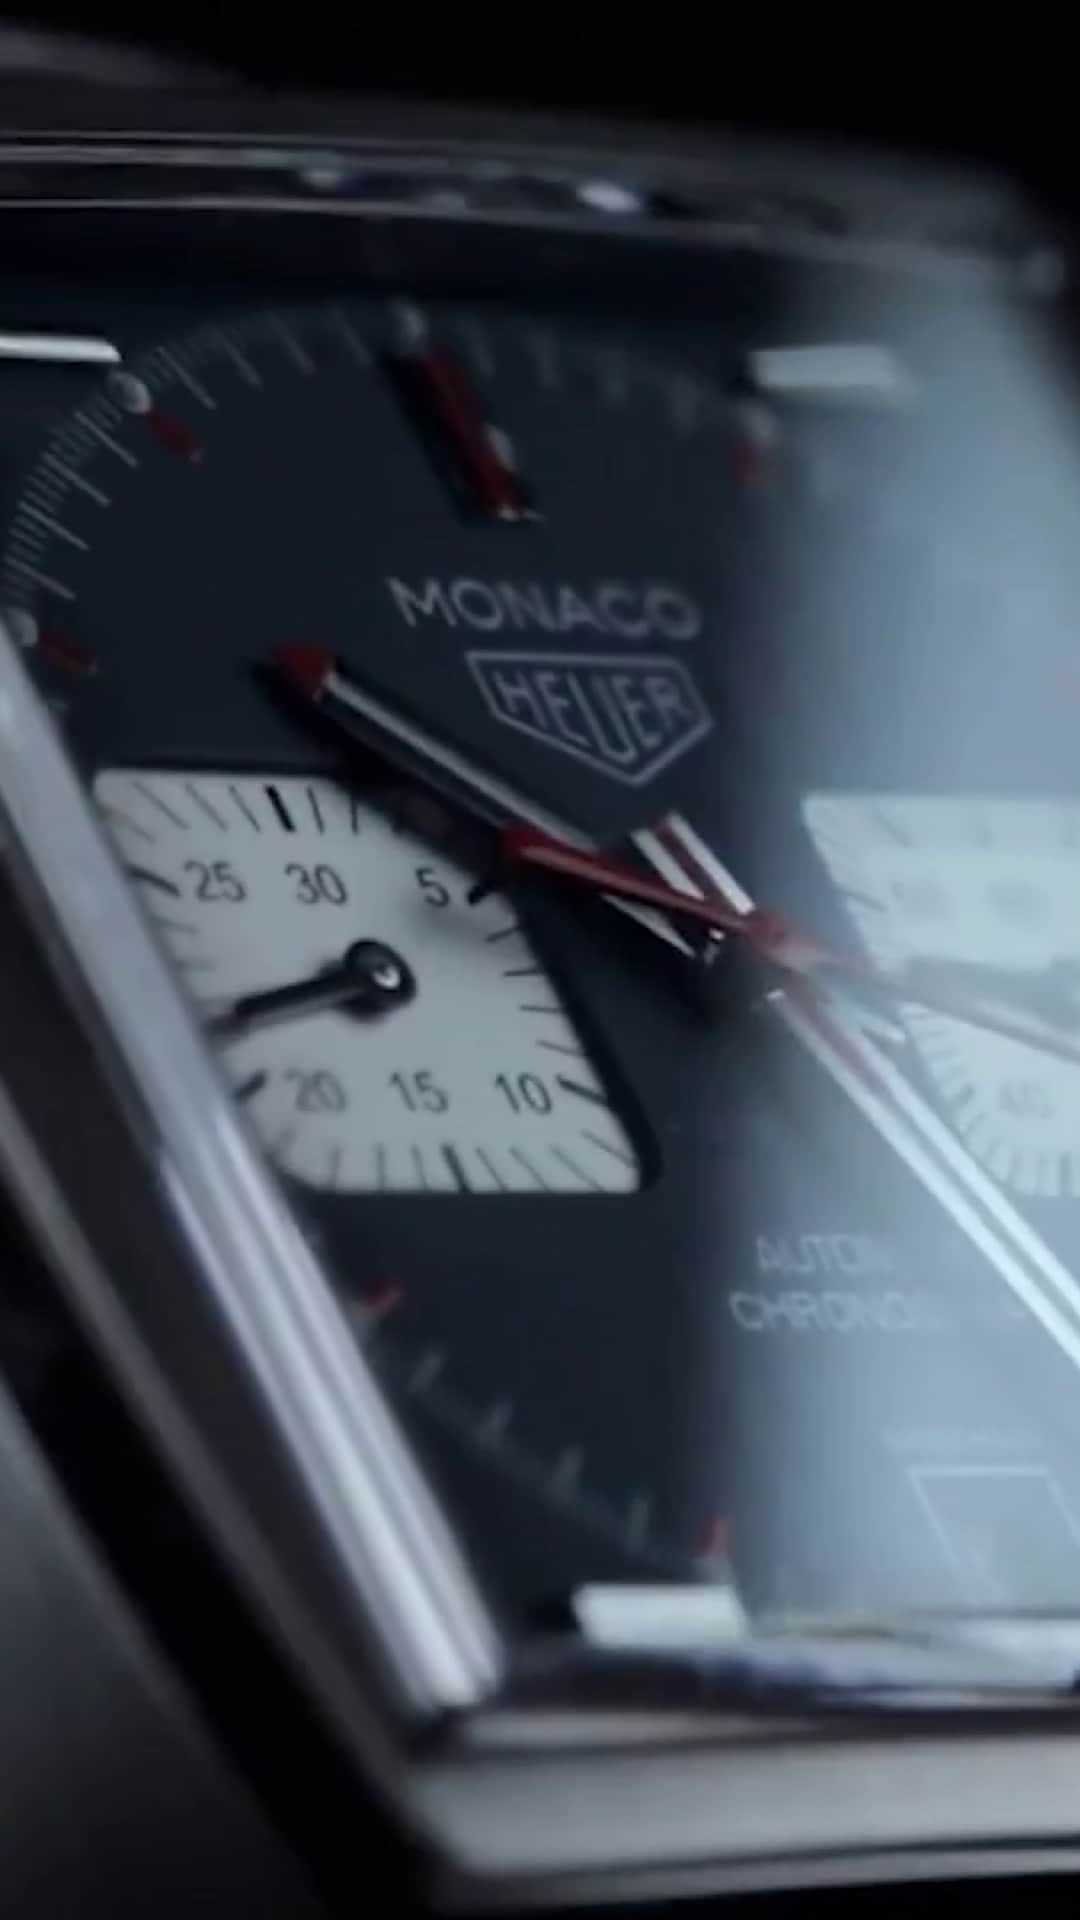 Discover our Monavo V4 High Horology Watch